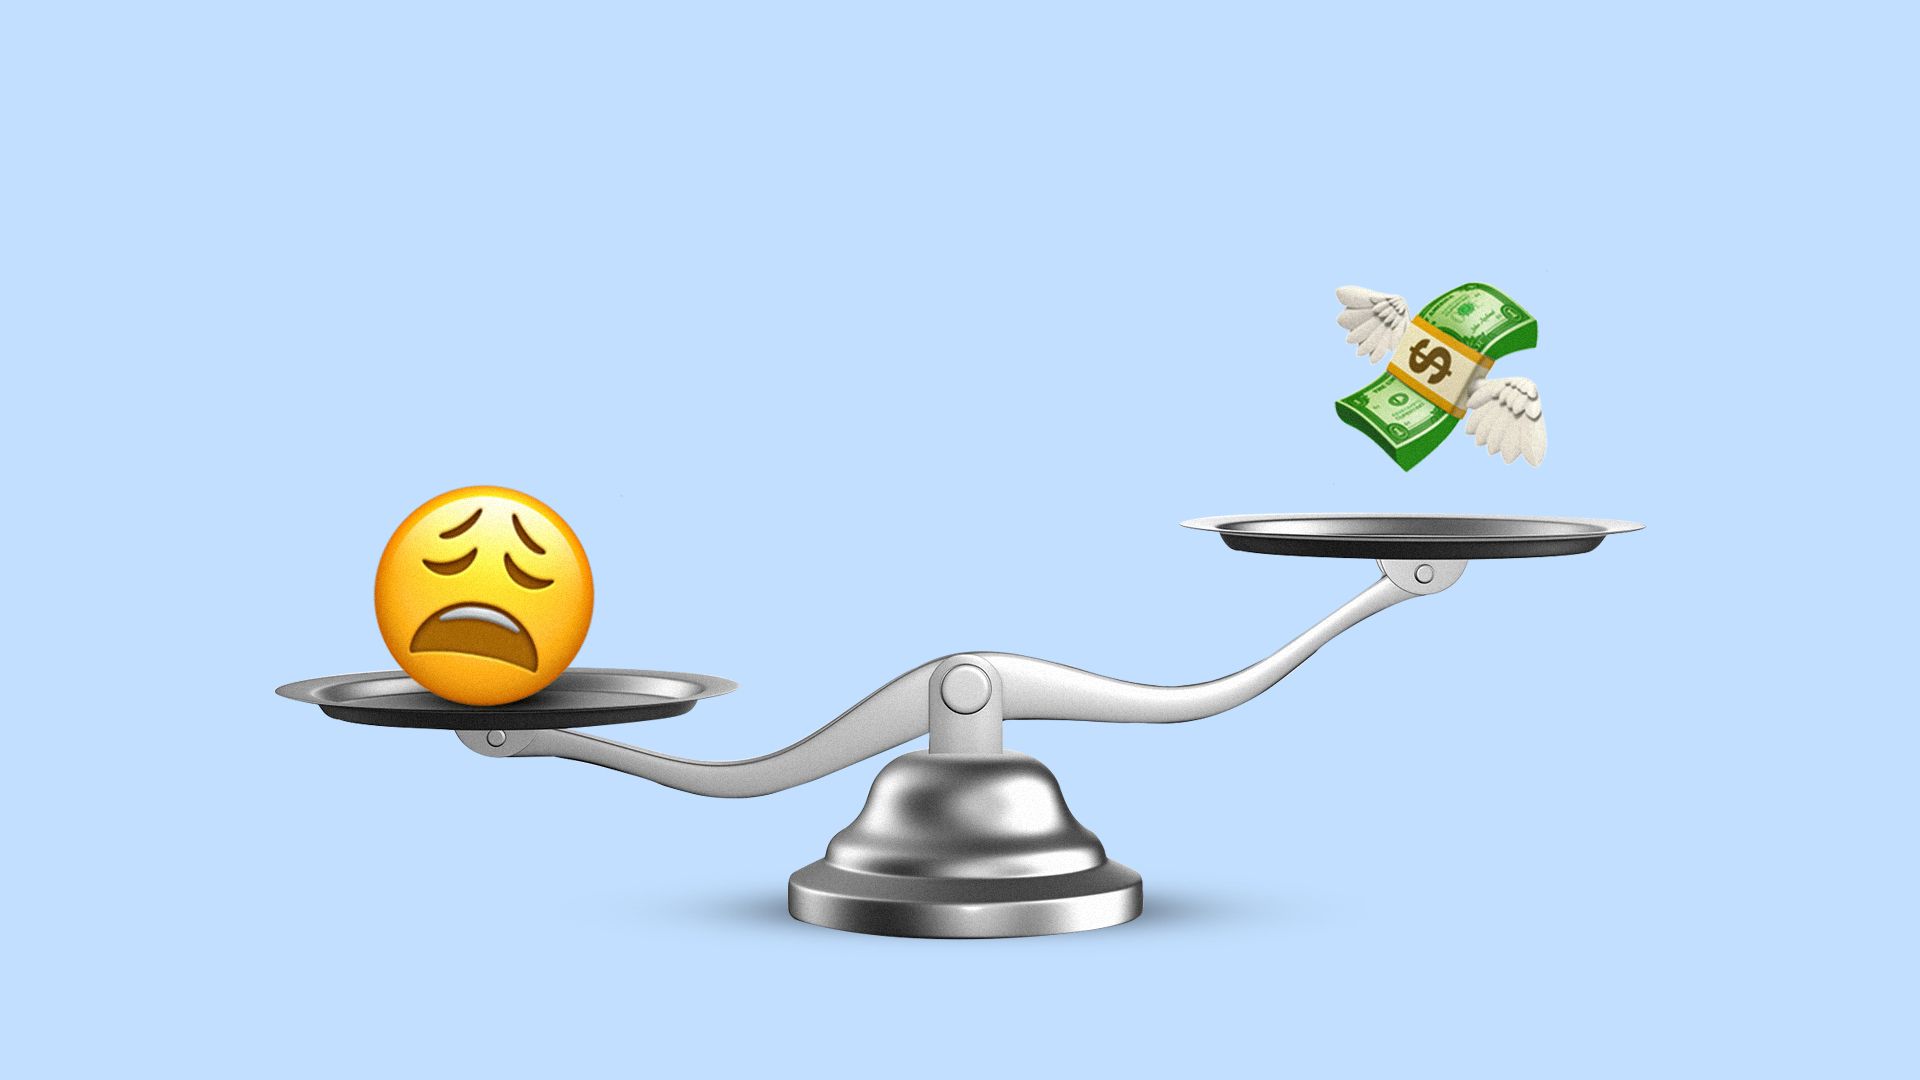 Illustration of a see saw with frustrated emoji on one side and a money emoji on the other